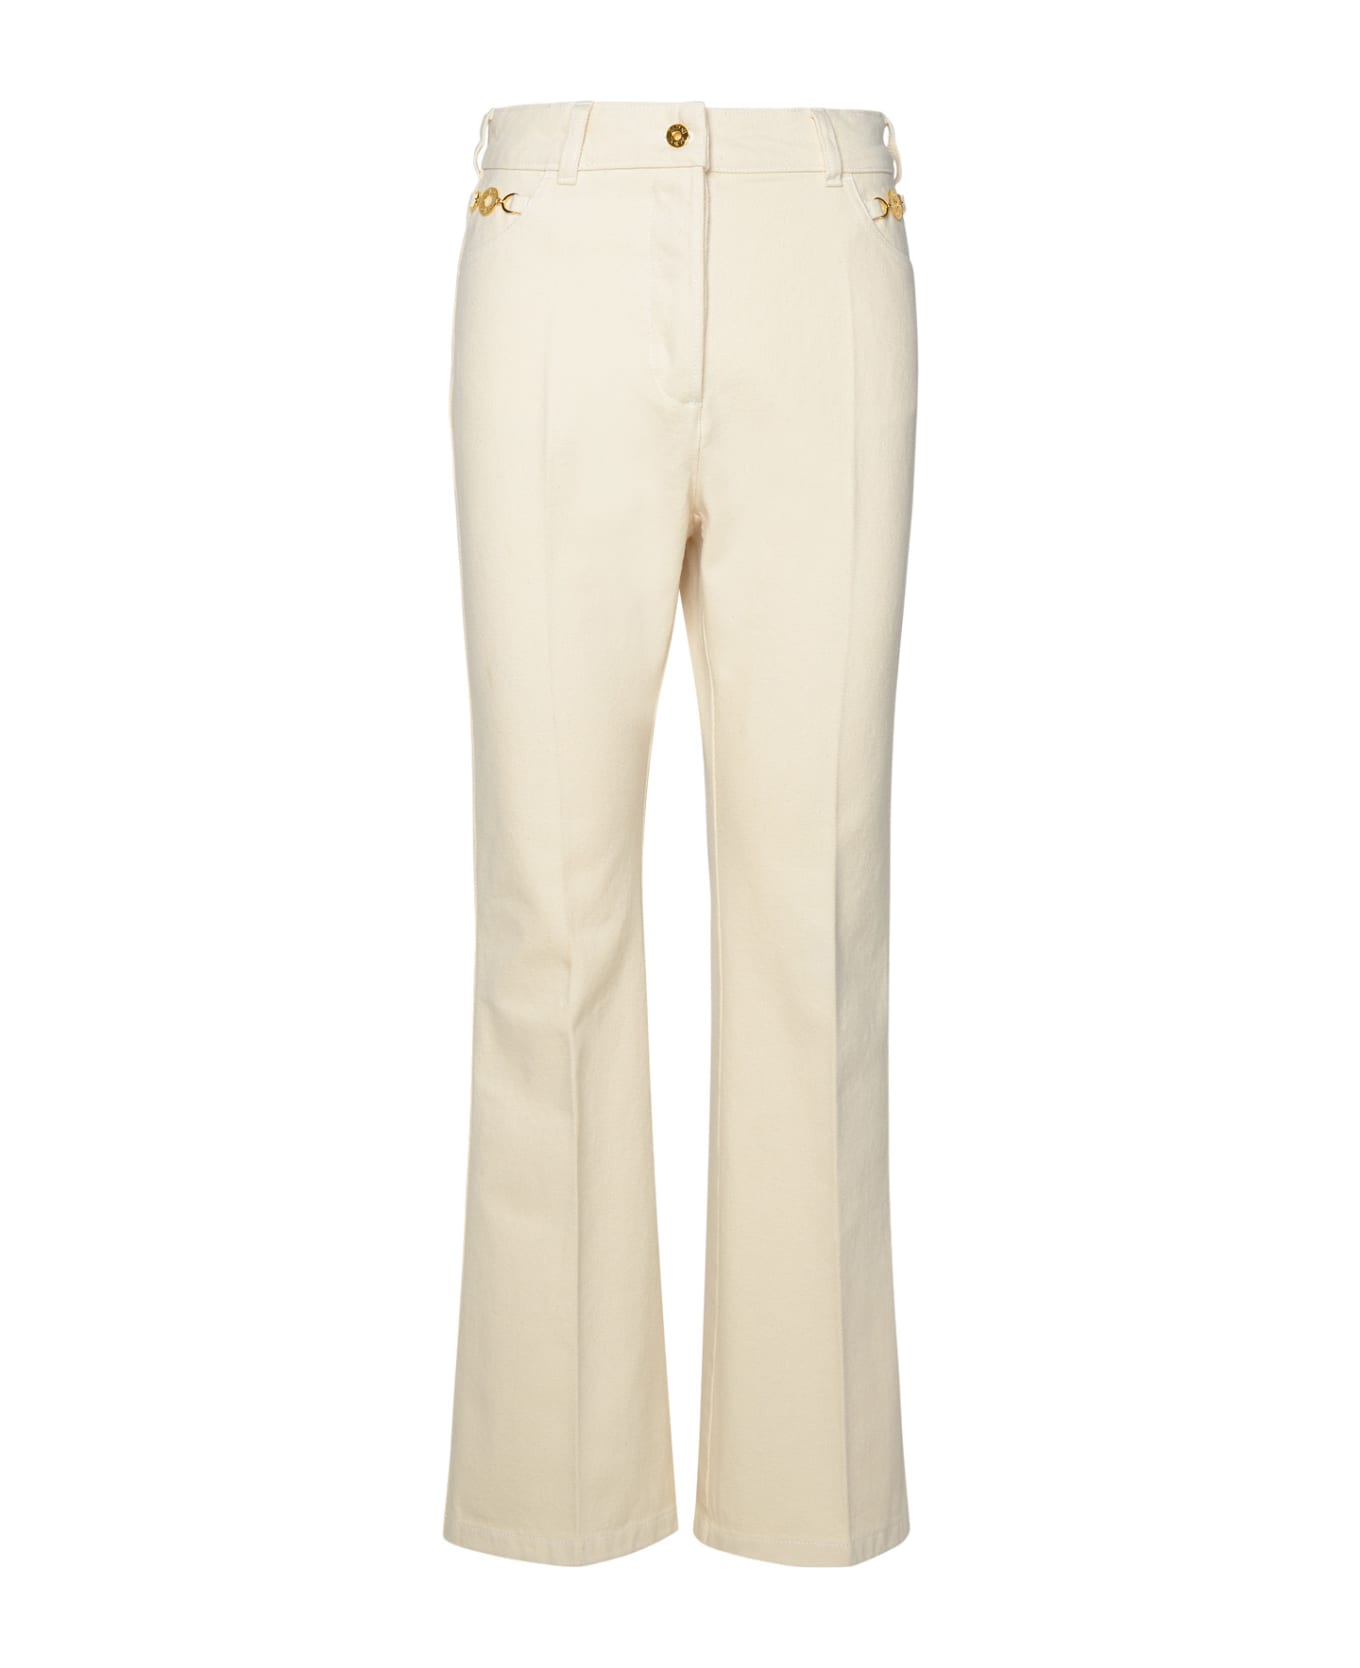 Patou Ivory Cotton Flare Jeans - Ivory ボトムス